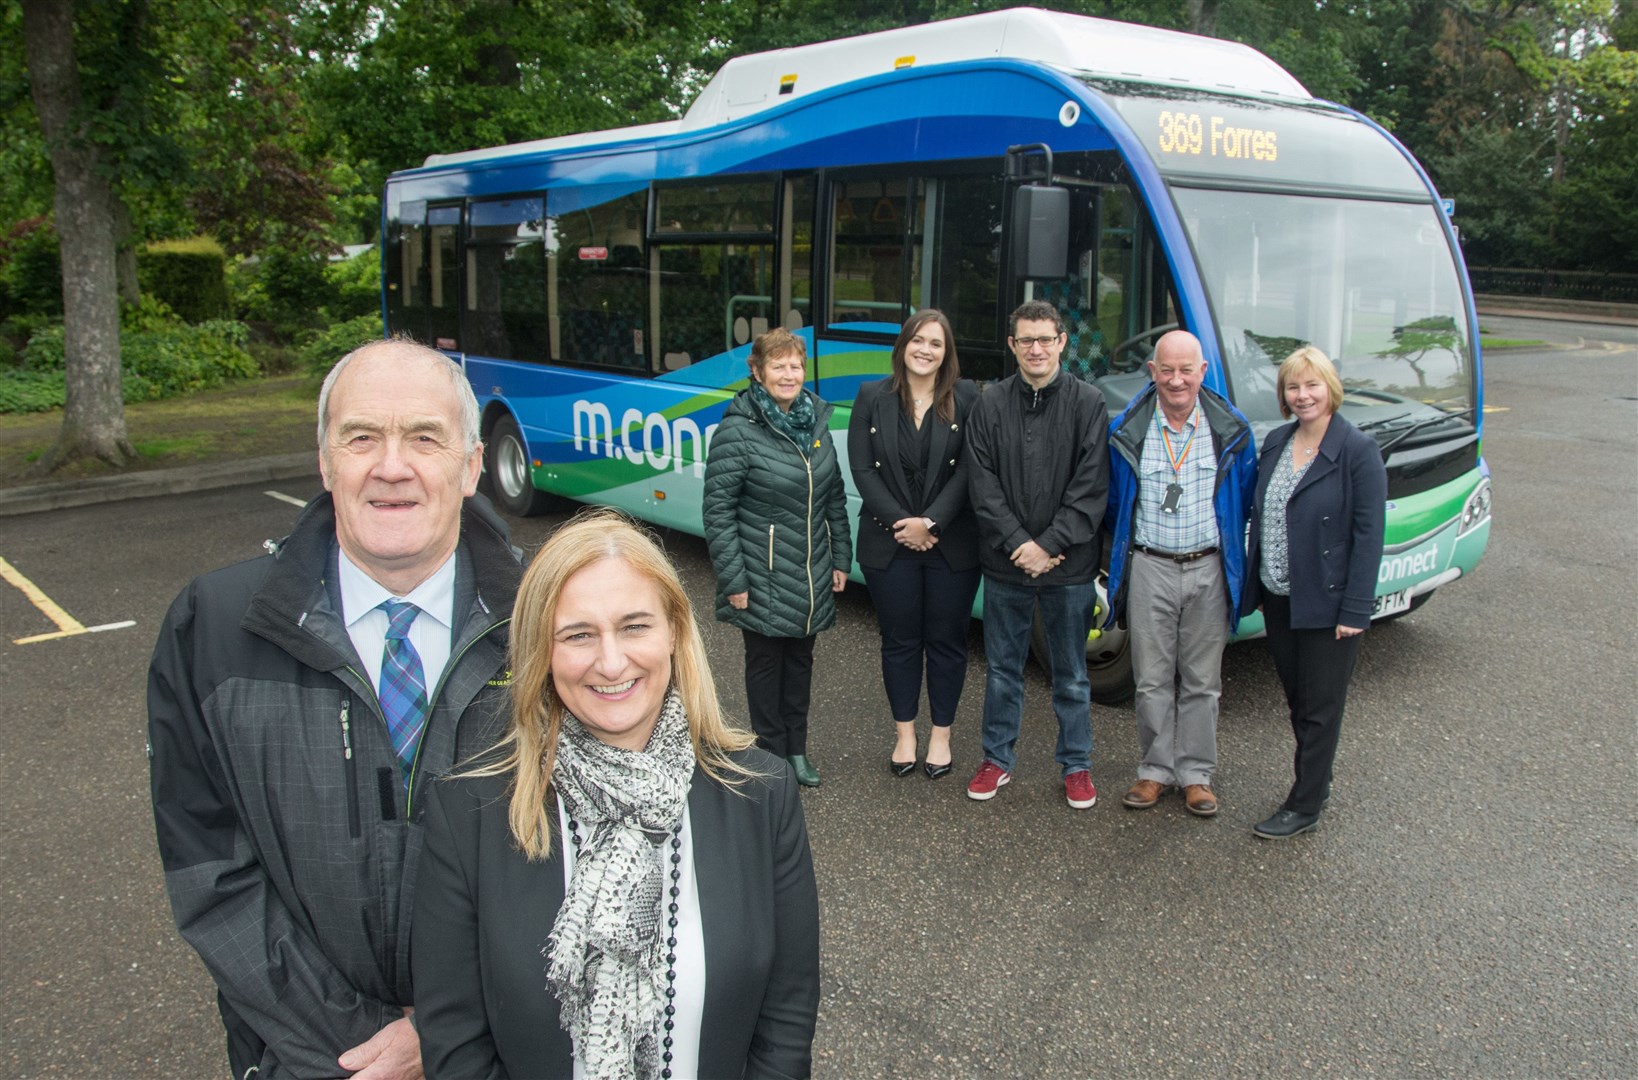 Councillors and representatives of HiTrans gather at the launch of the electric bus, which took place earlier this year.